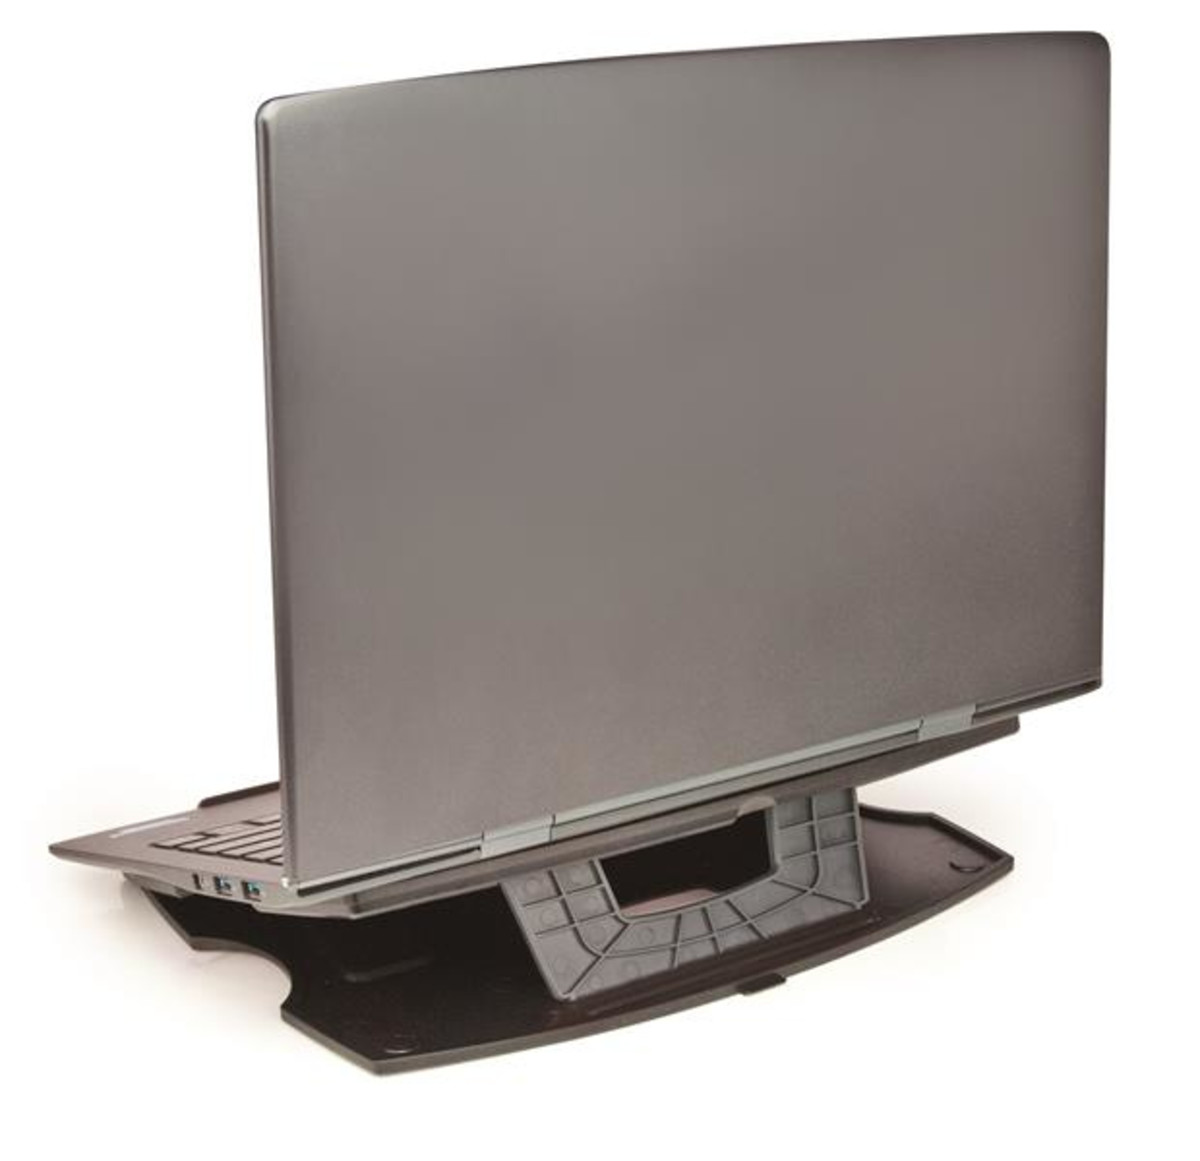 Portable Laptop Stand - Adjustable